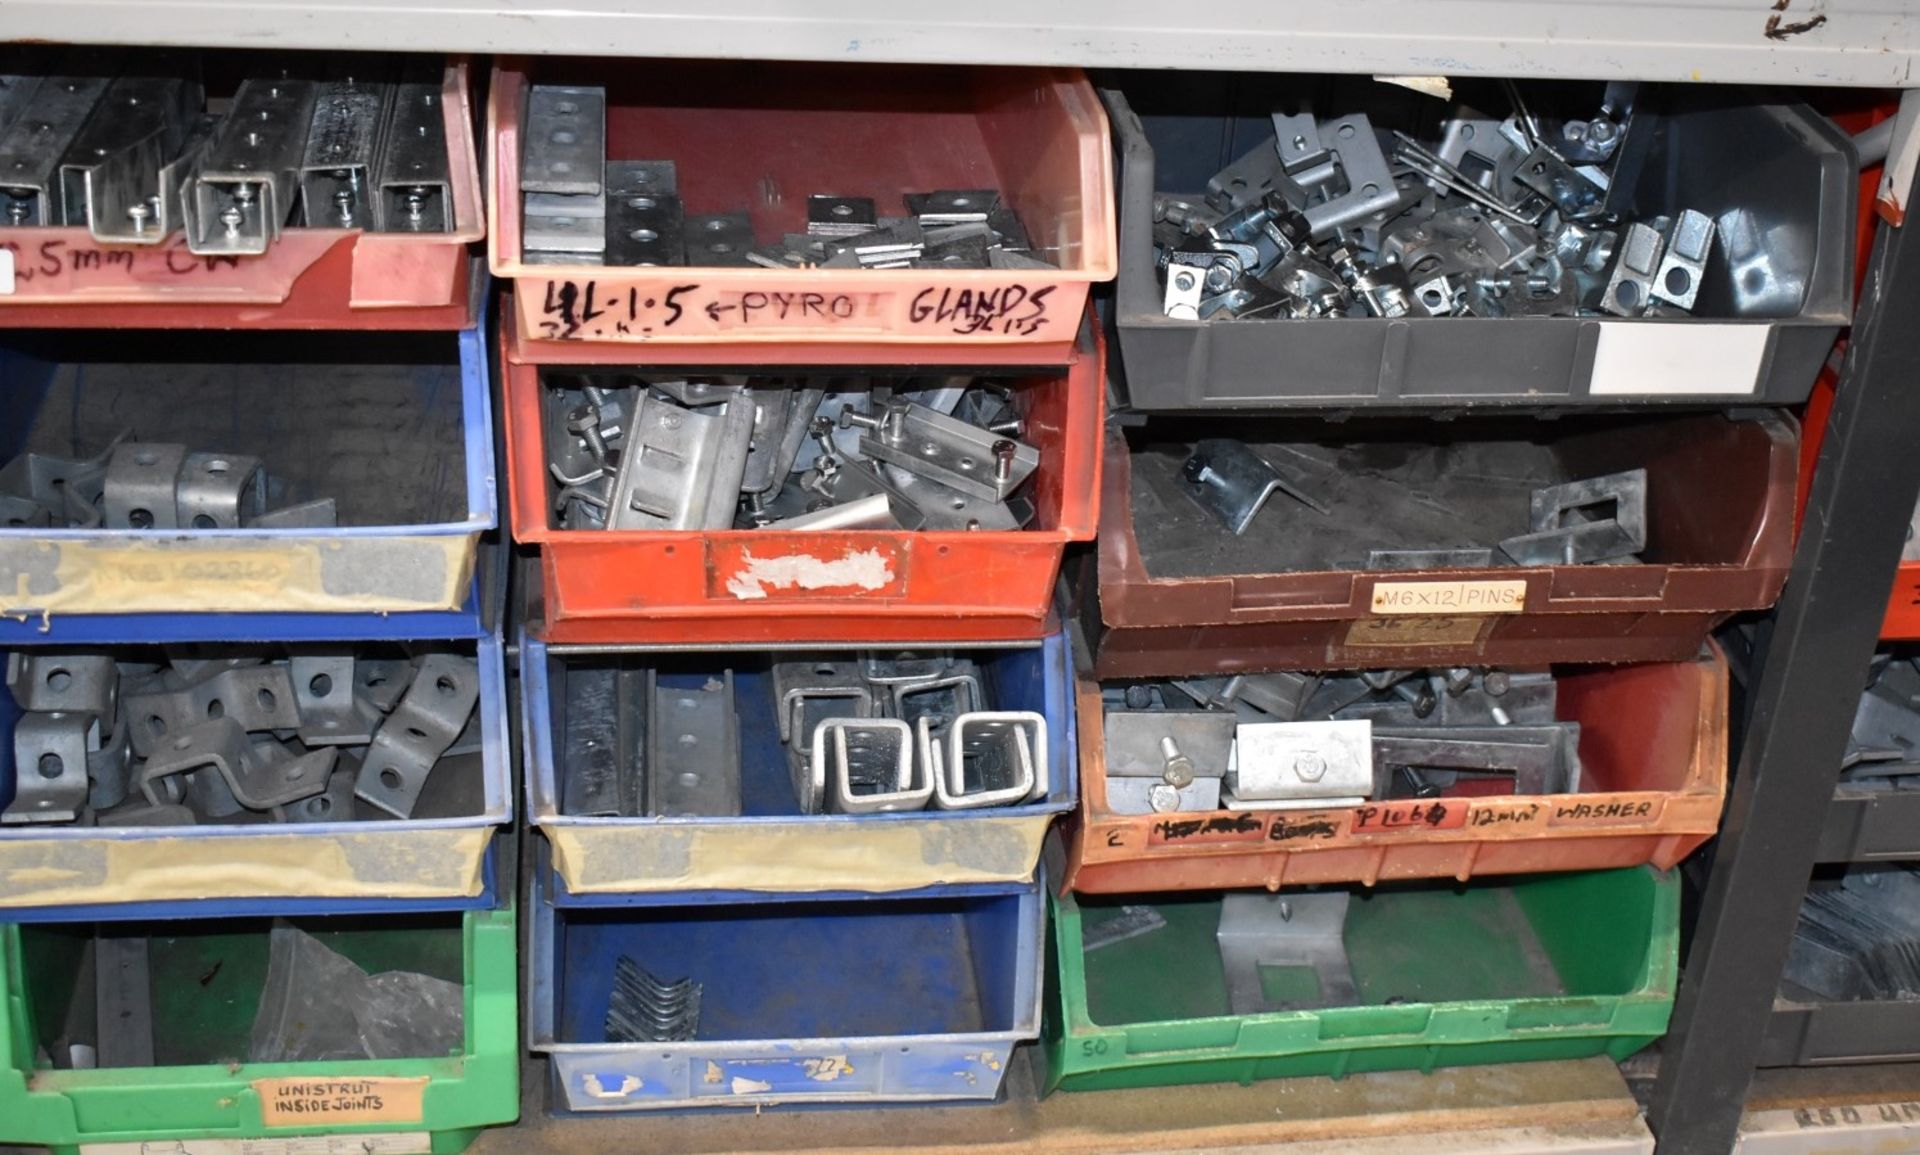 23 x Large Linbins With Contents - Includes Various Metal Conduit Fittings and Brackets - Image 4 of 25